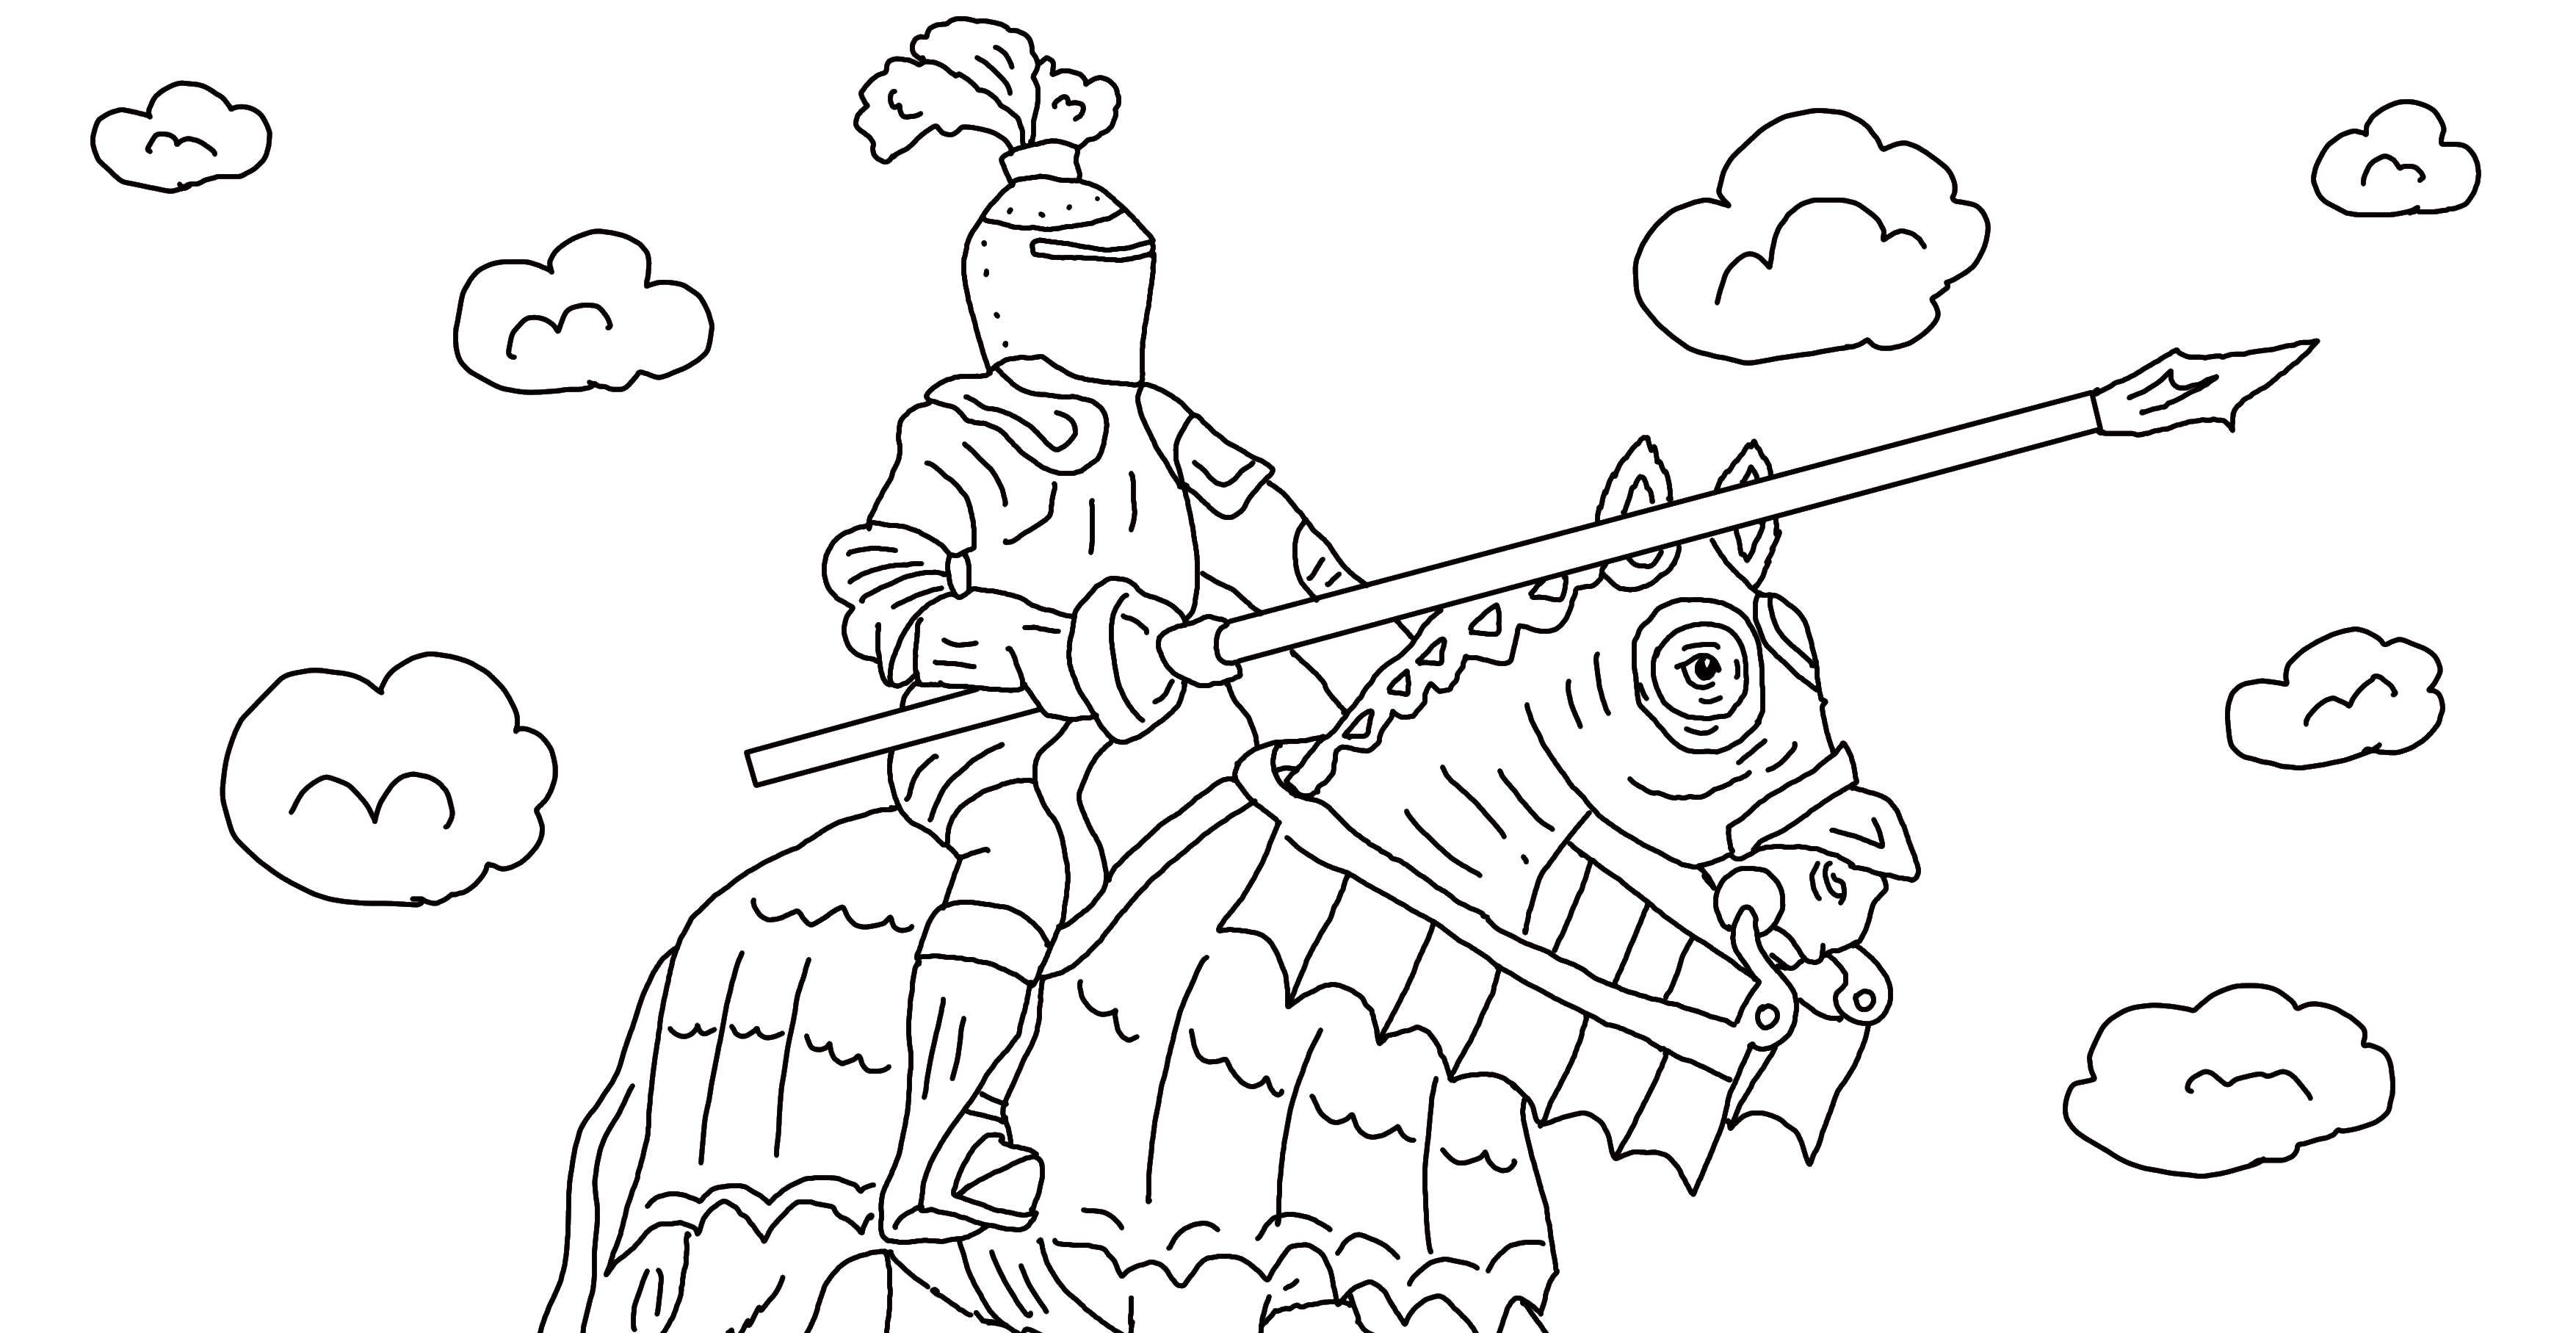 Coloring Knight on horseback in armor. Category Knights . Tags:  knight , armor.